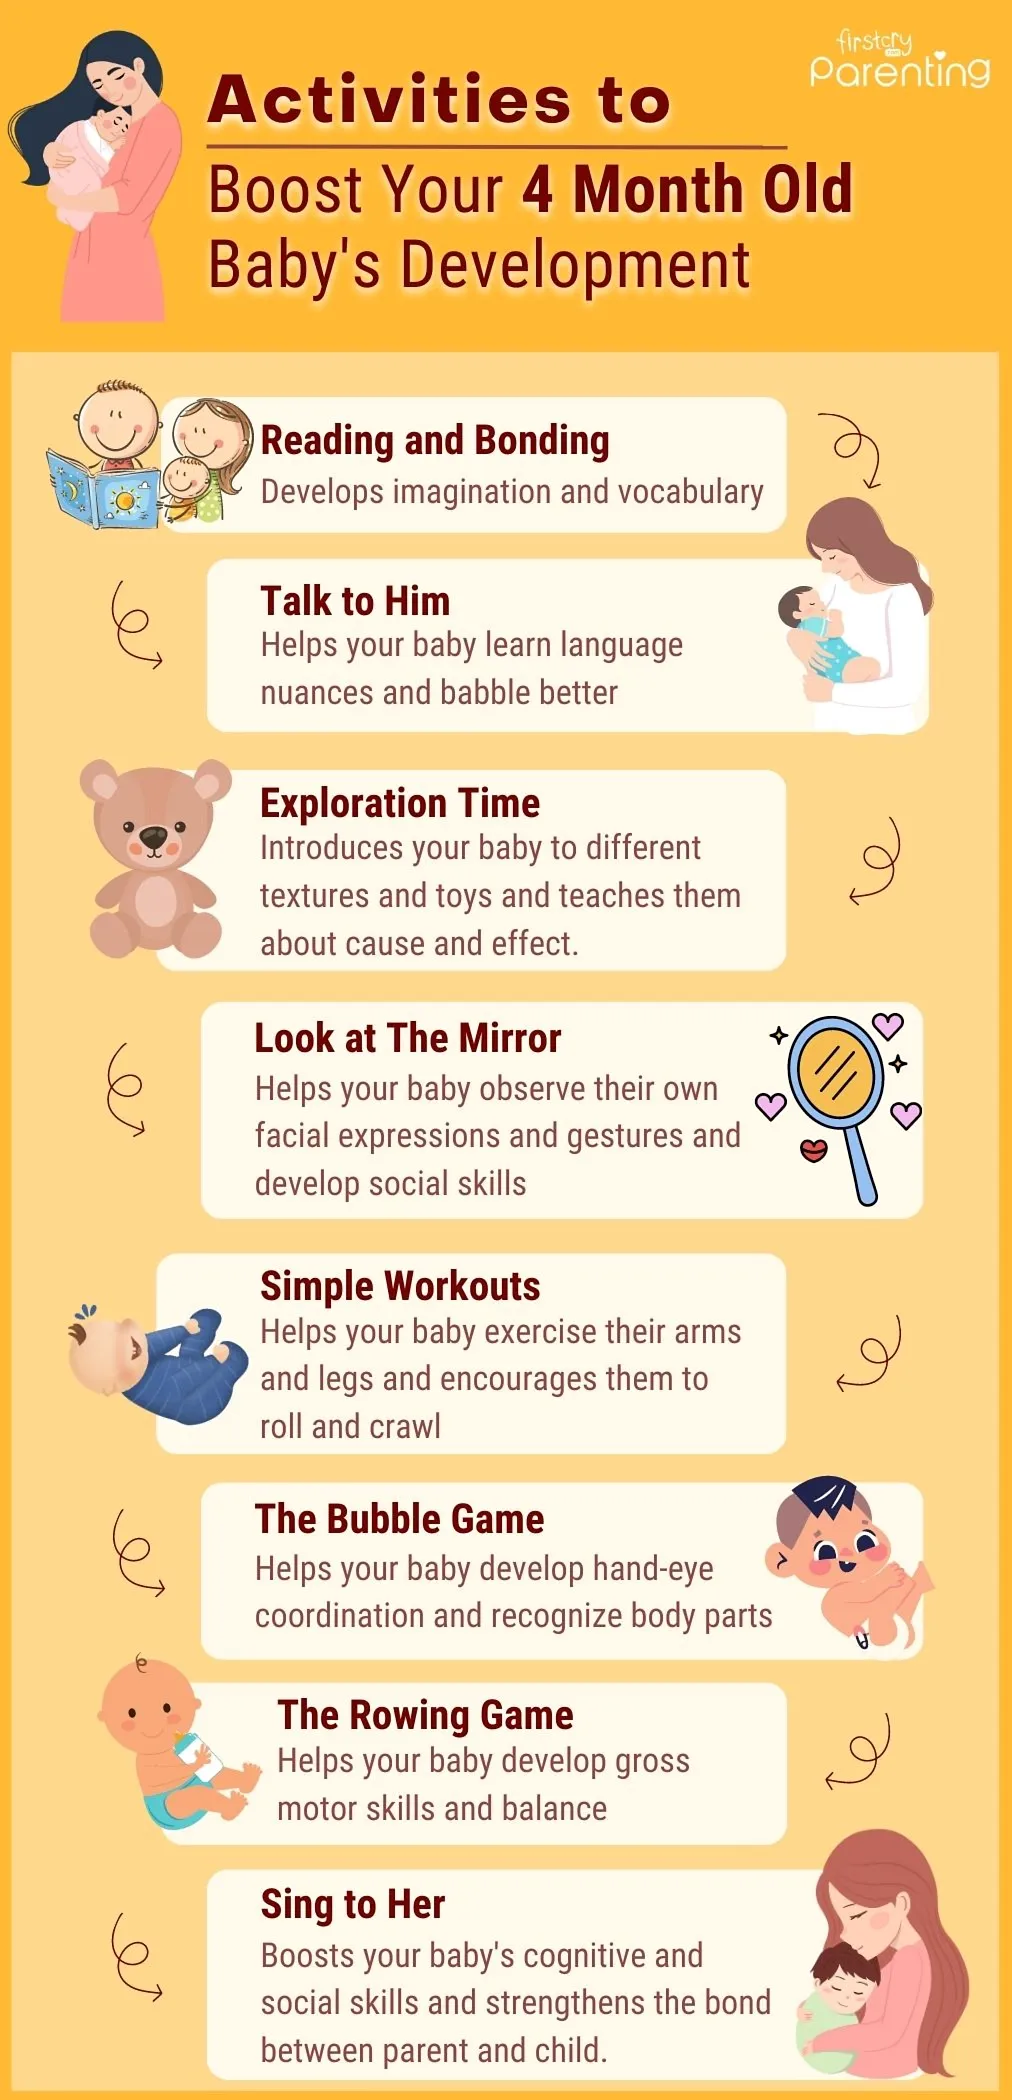 Activities to Boost Your 4 Month Old Baby's Development - Infographic